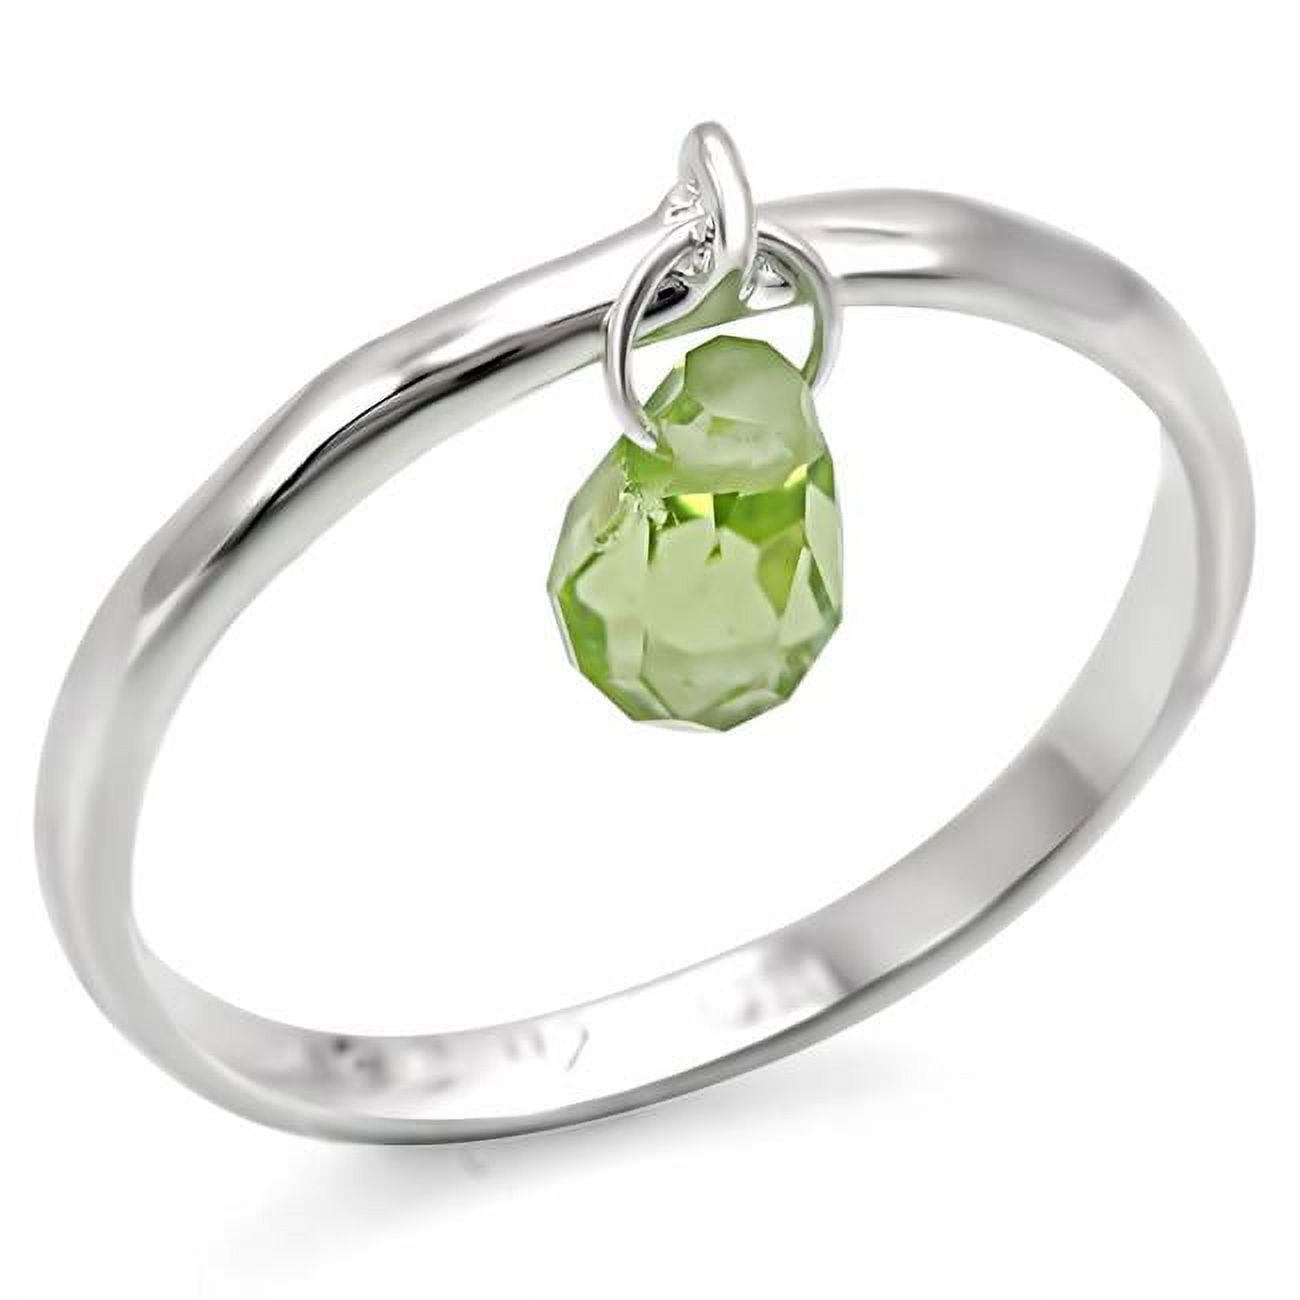 Picture of Alamode LOS321-6 Women Silver 925 Sterling Silver Ring with Genuine Stone in Peridot - Size 6